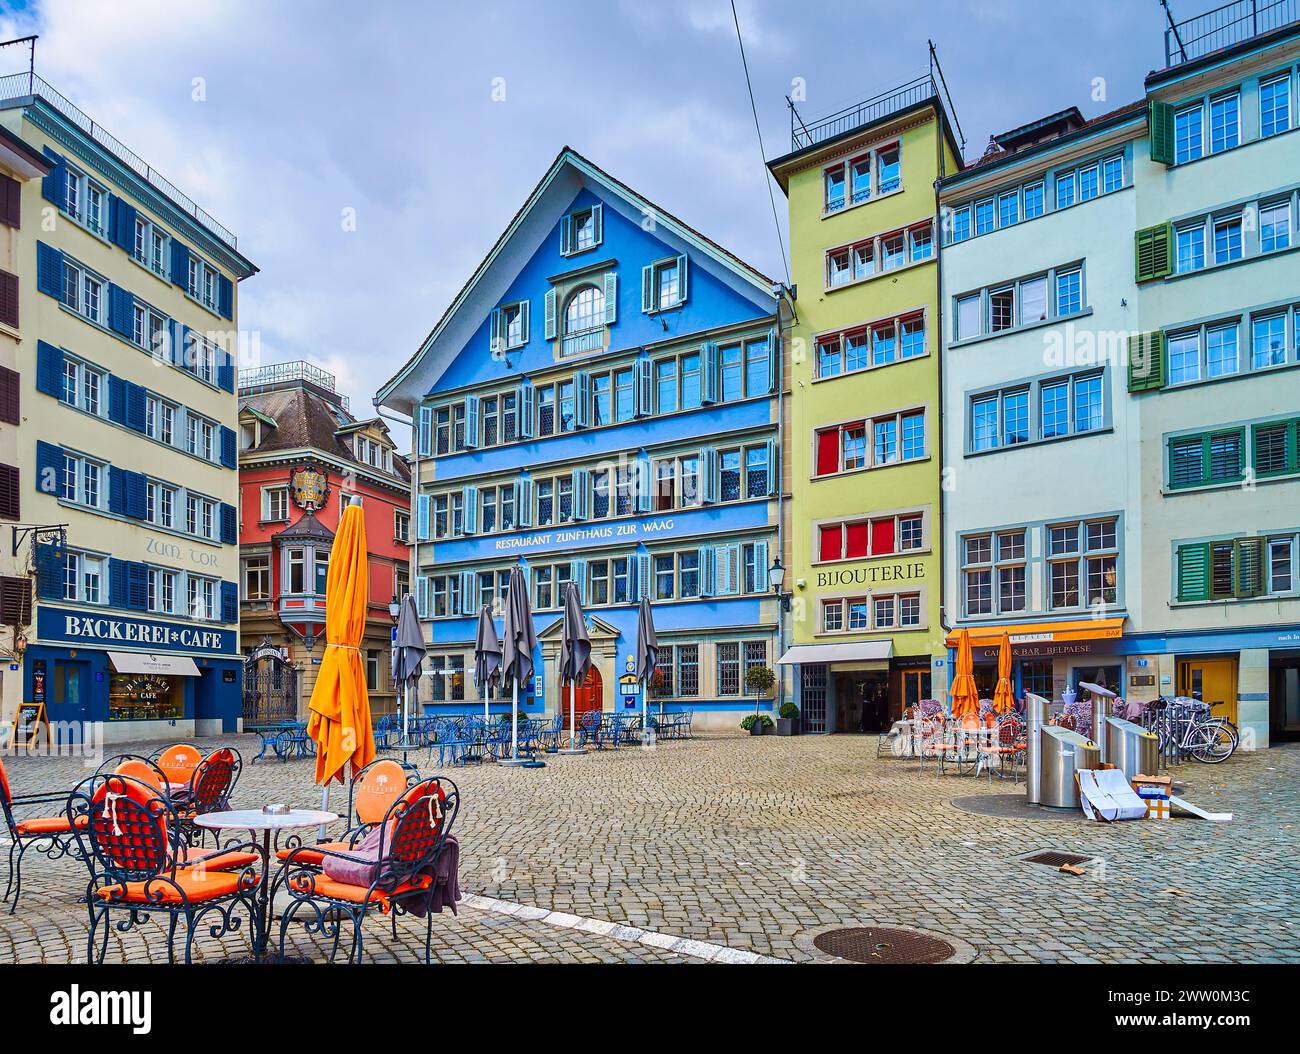 ZURICH, SWITZERLAND - APRIL 3, 2022: Munsterhof Square's medieval townhouses with atmospheric restaurant outdoor seating, on April 3 in Zurich, Switze Stock Photo